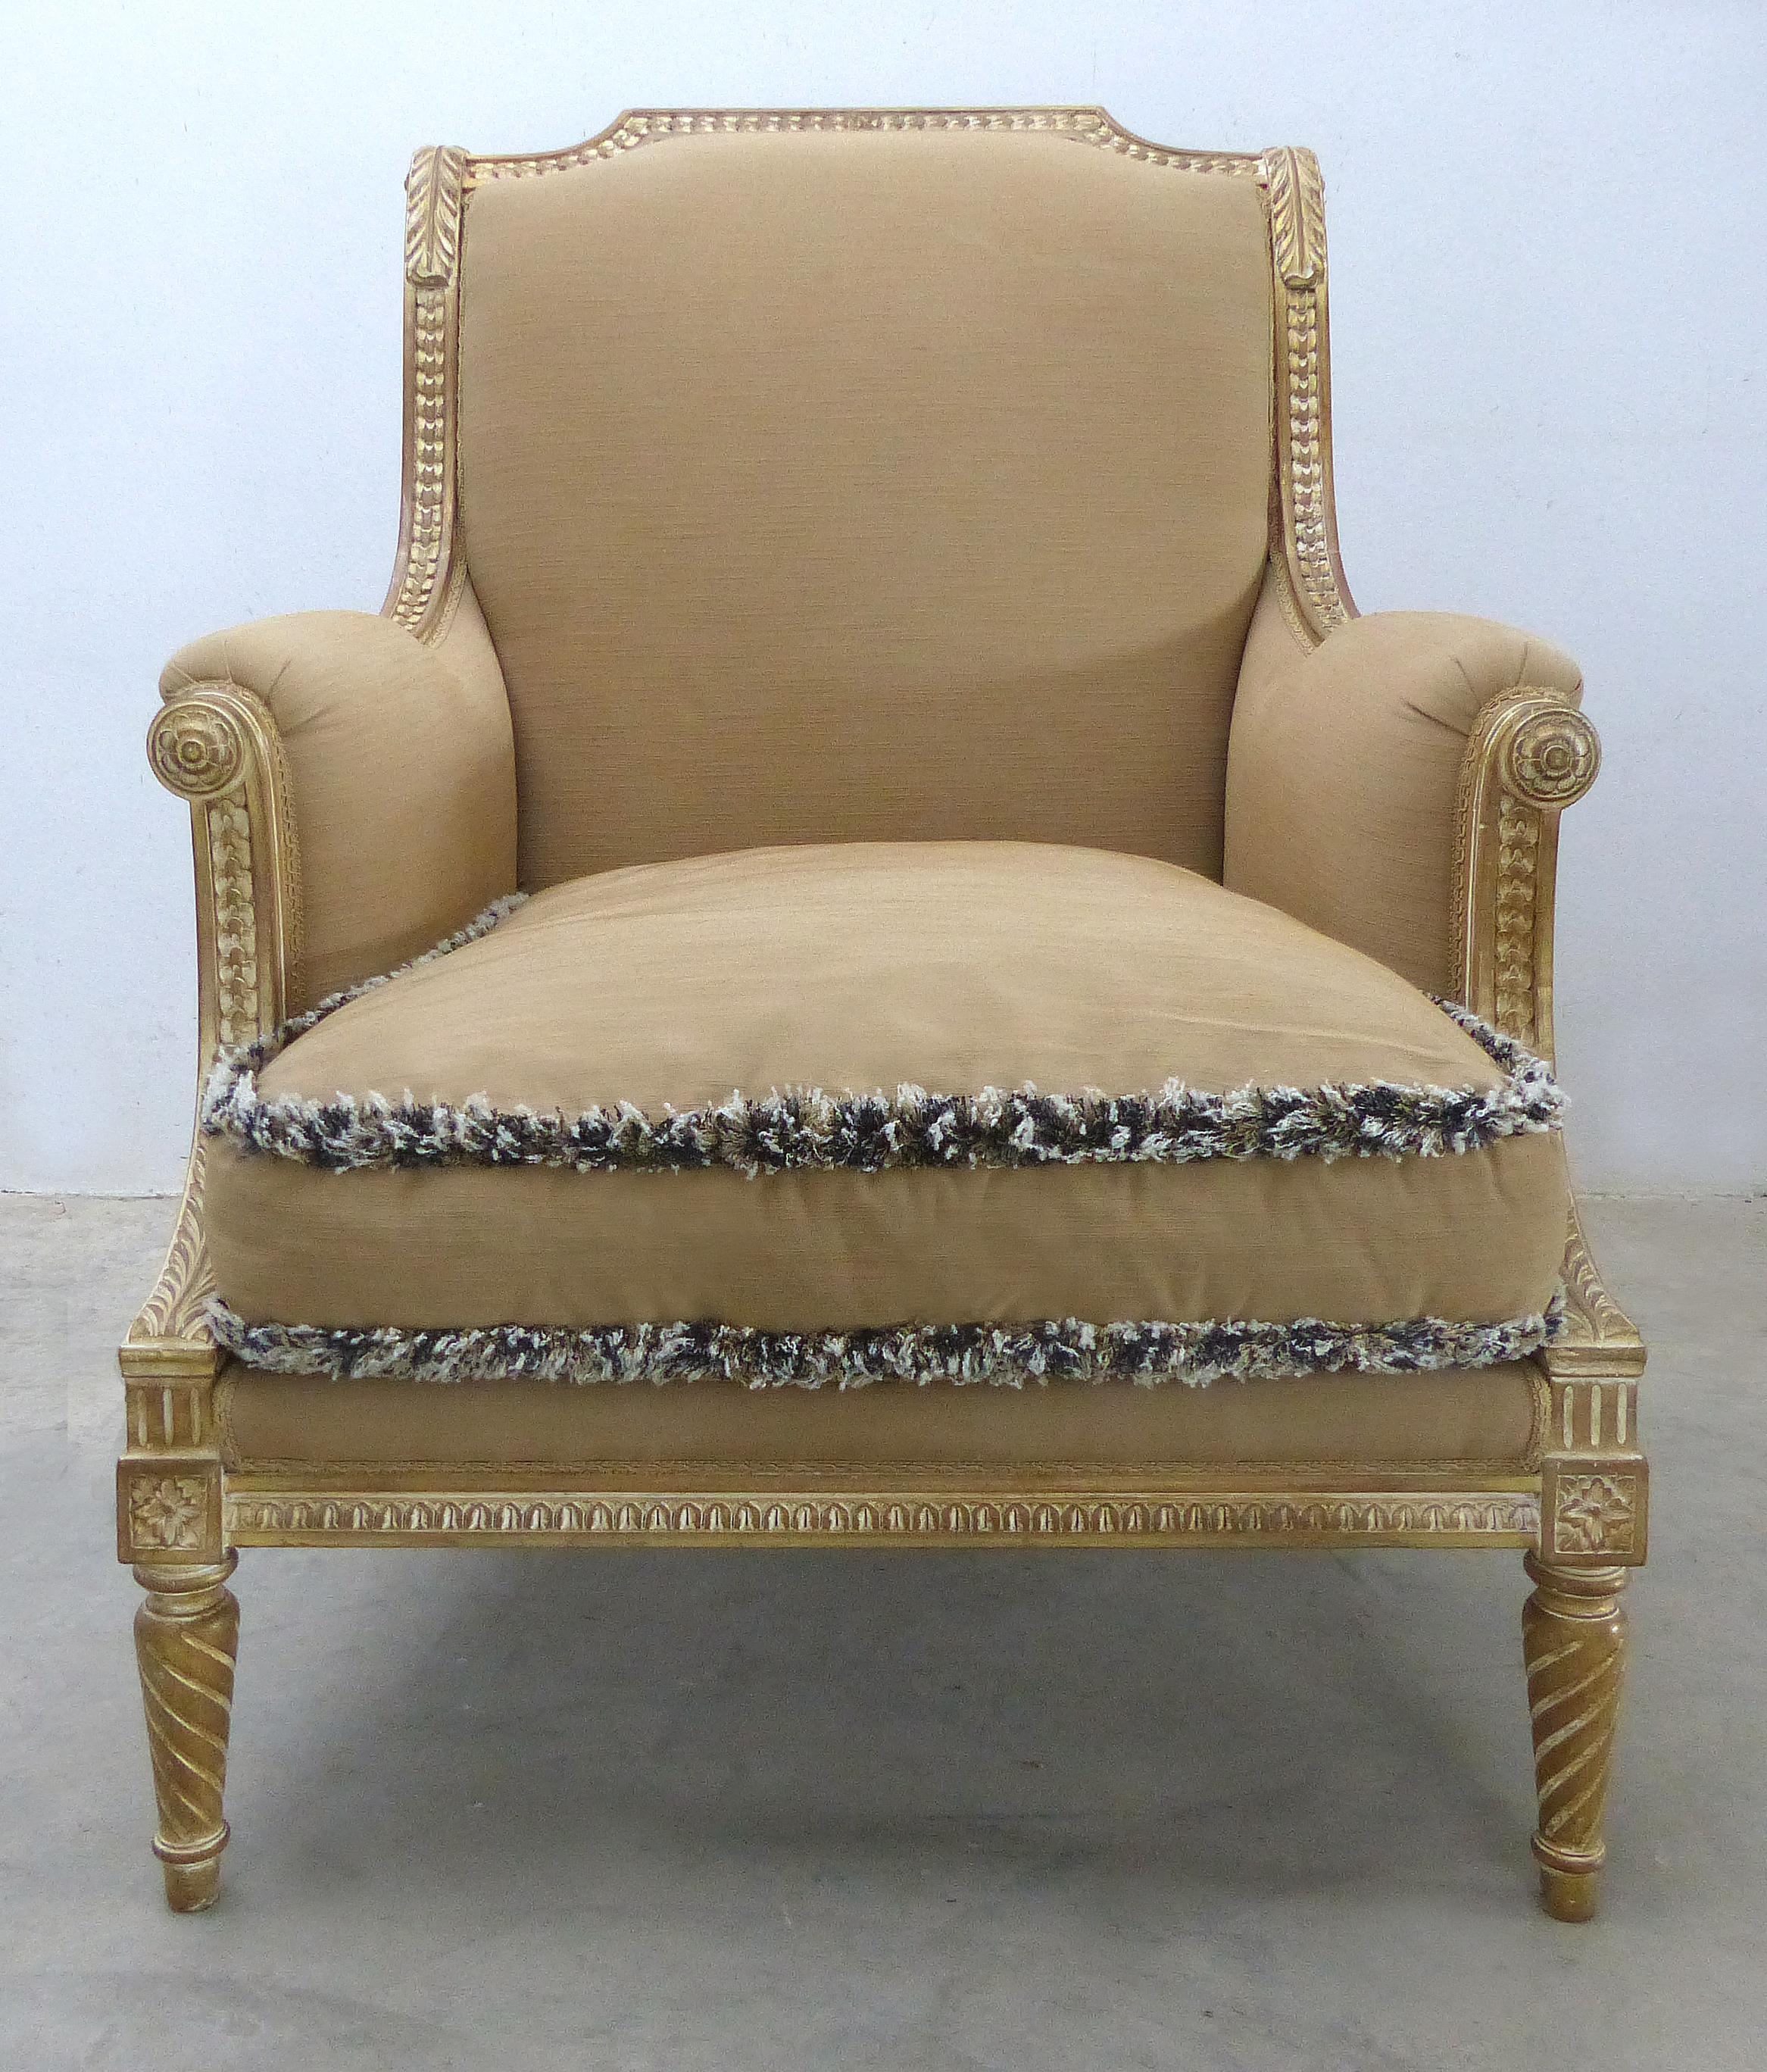 Provasi Parcel-Gilt Louis Vxi Style Upholstered Bergere

Offered for sale is a beautifully carved parcel-gilt Louis XVI style bergere manufactured by the Italian luxury furniture company Provasi. The Provasi family have been furniture makers for